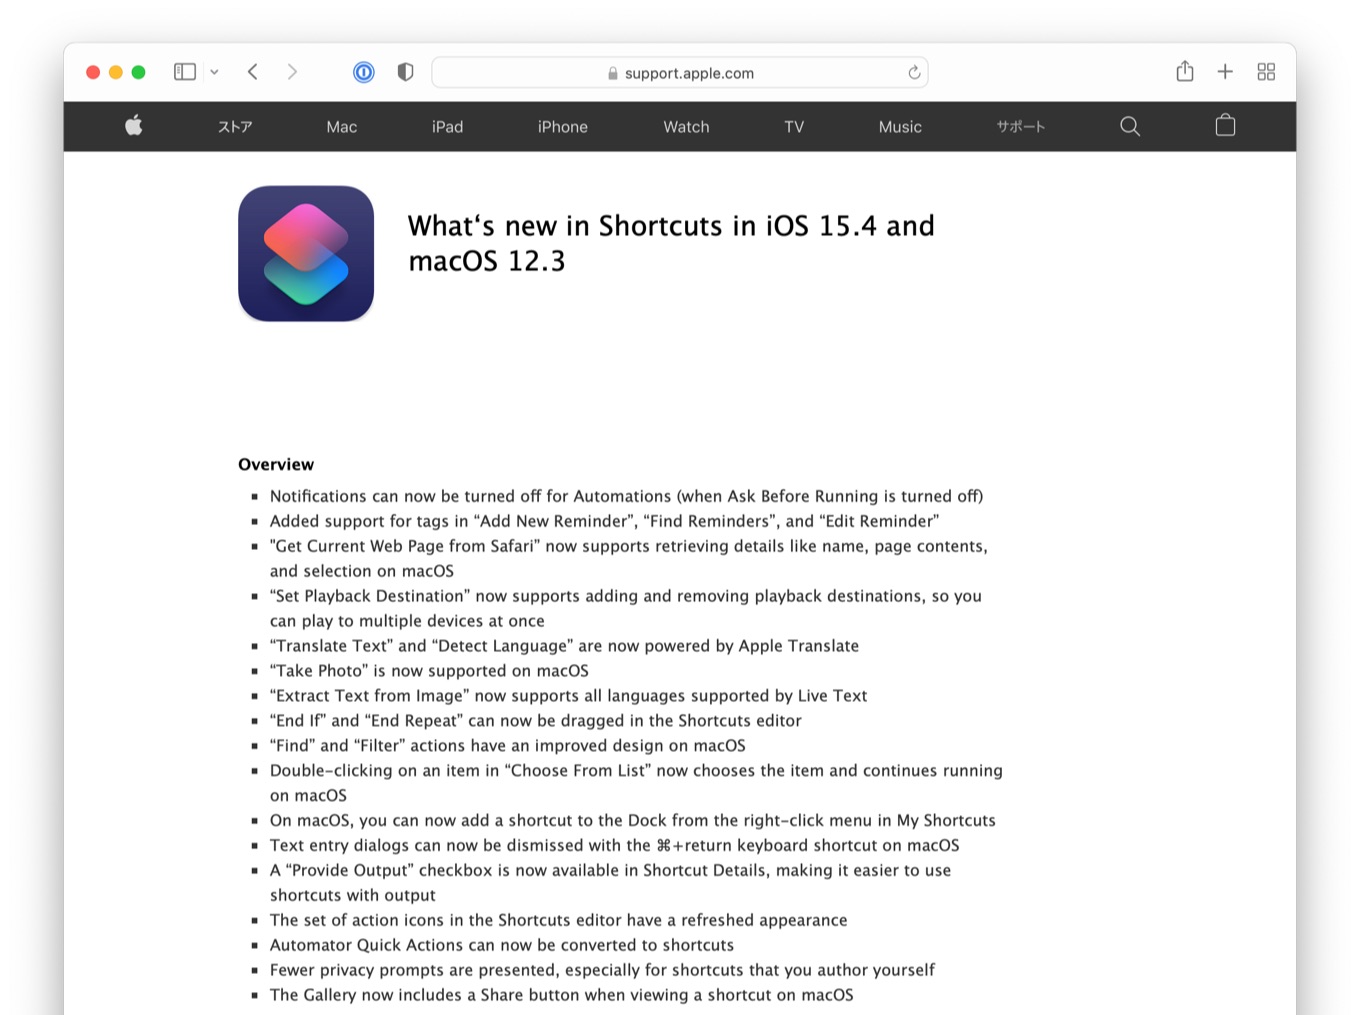 What‘s new in Shortcuts in iOS 15.4 and macOS 12.3